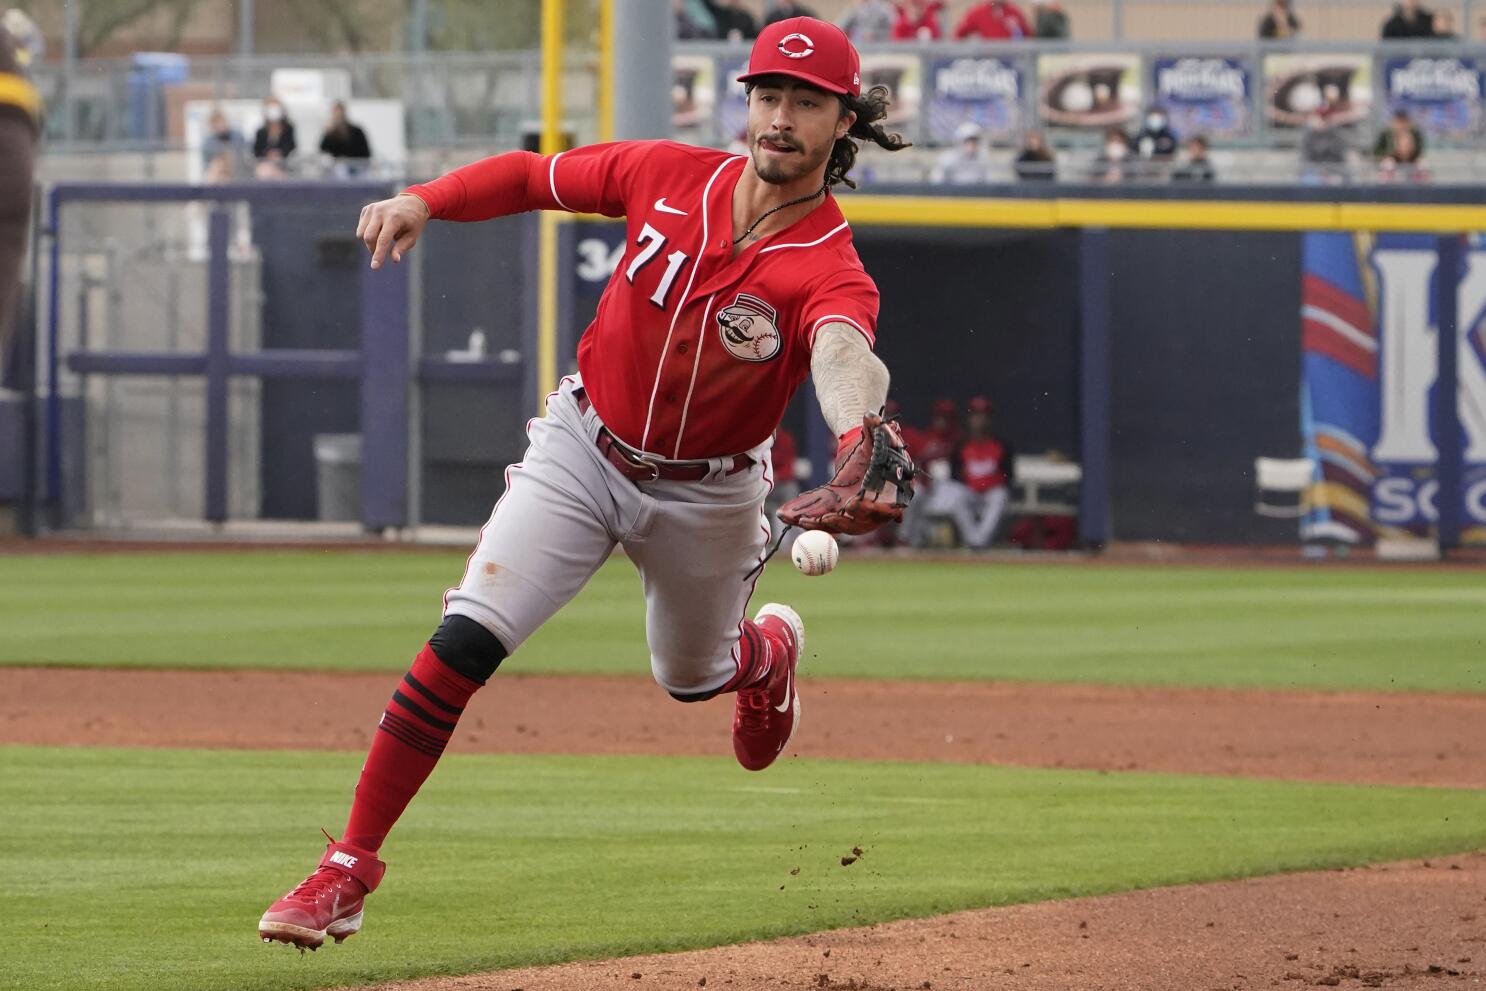 Reds' India impresses in spring, could be ready for breakout - The